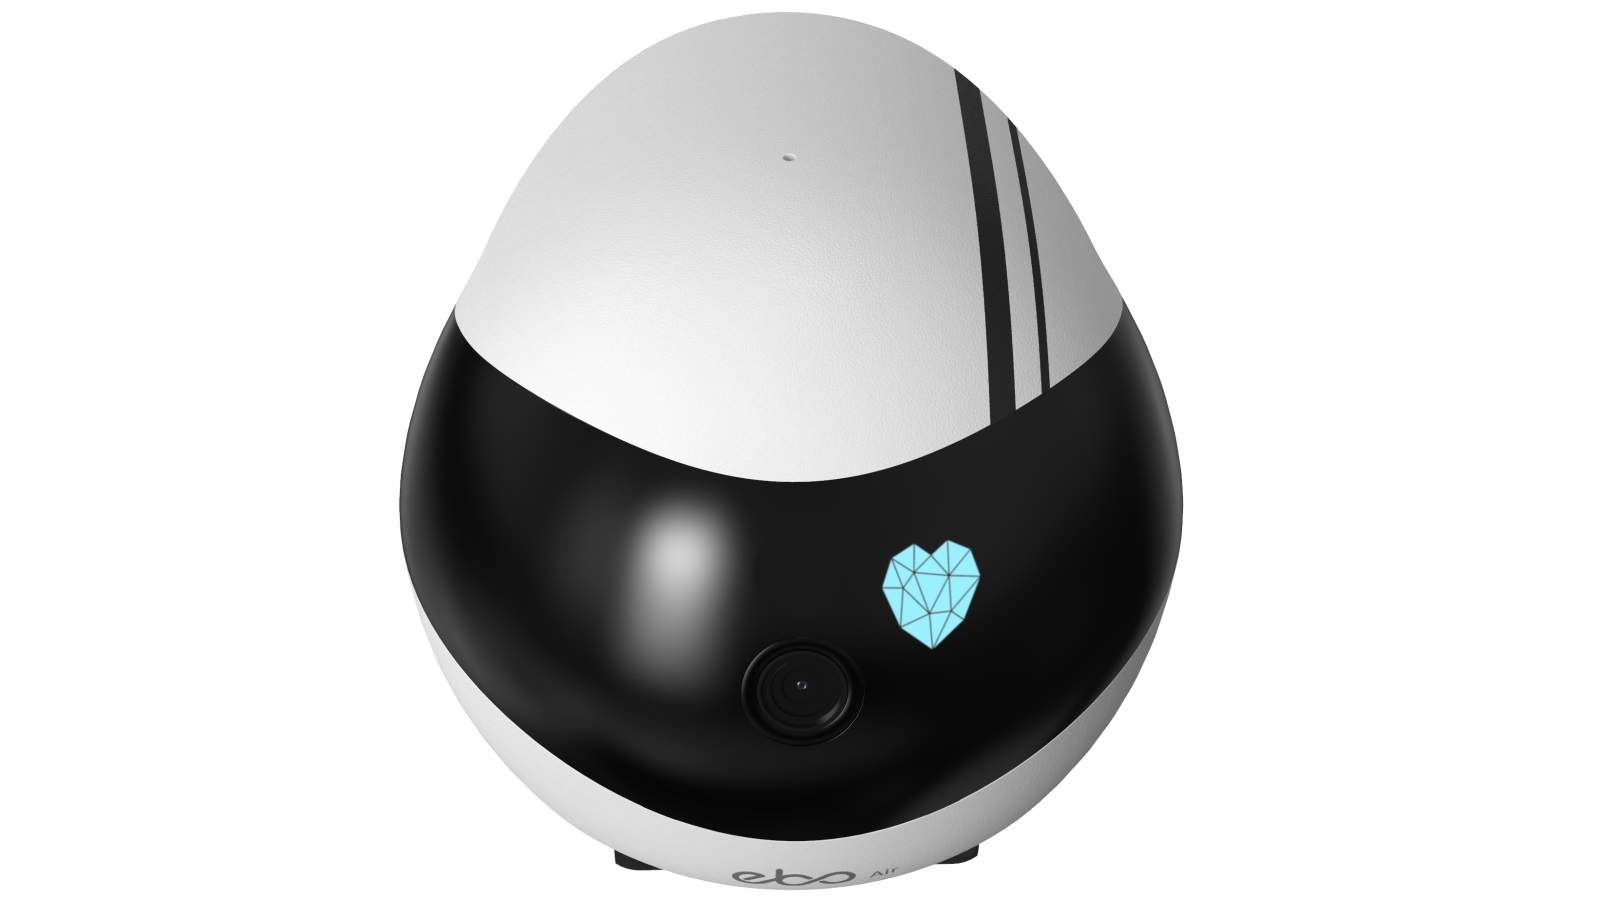 Numerous Security Bugs Found In Enabot Ebo Air Smart Robot